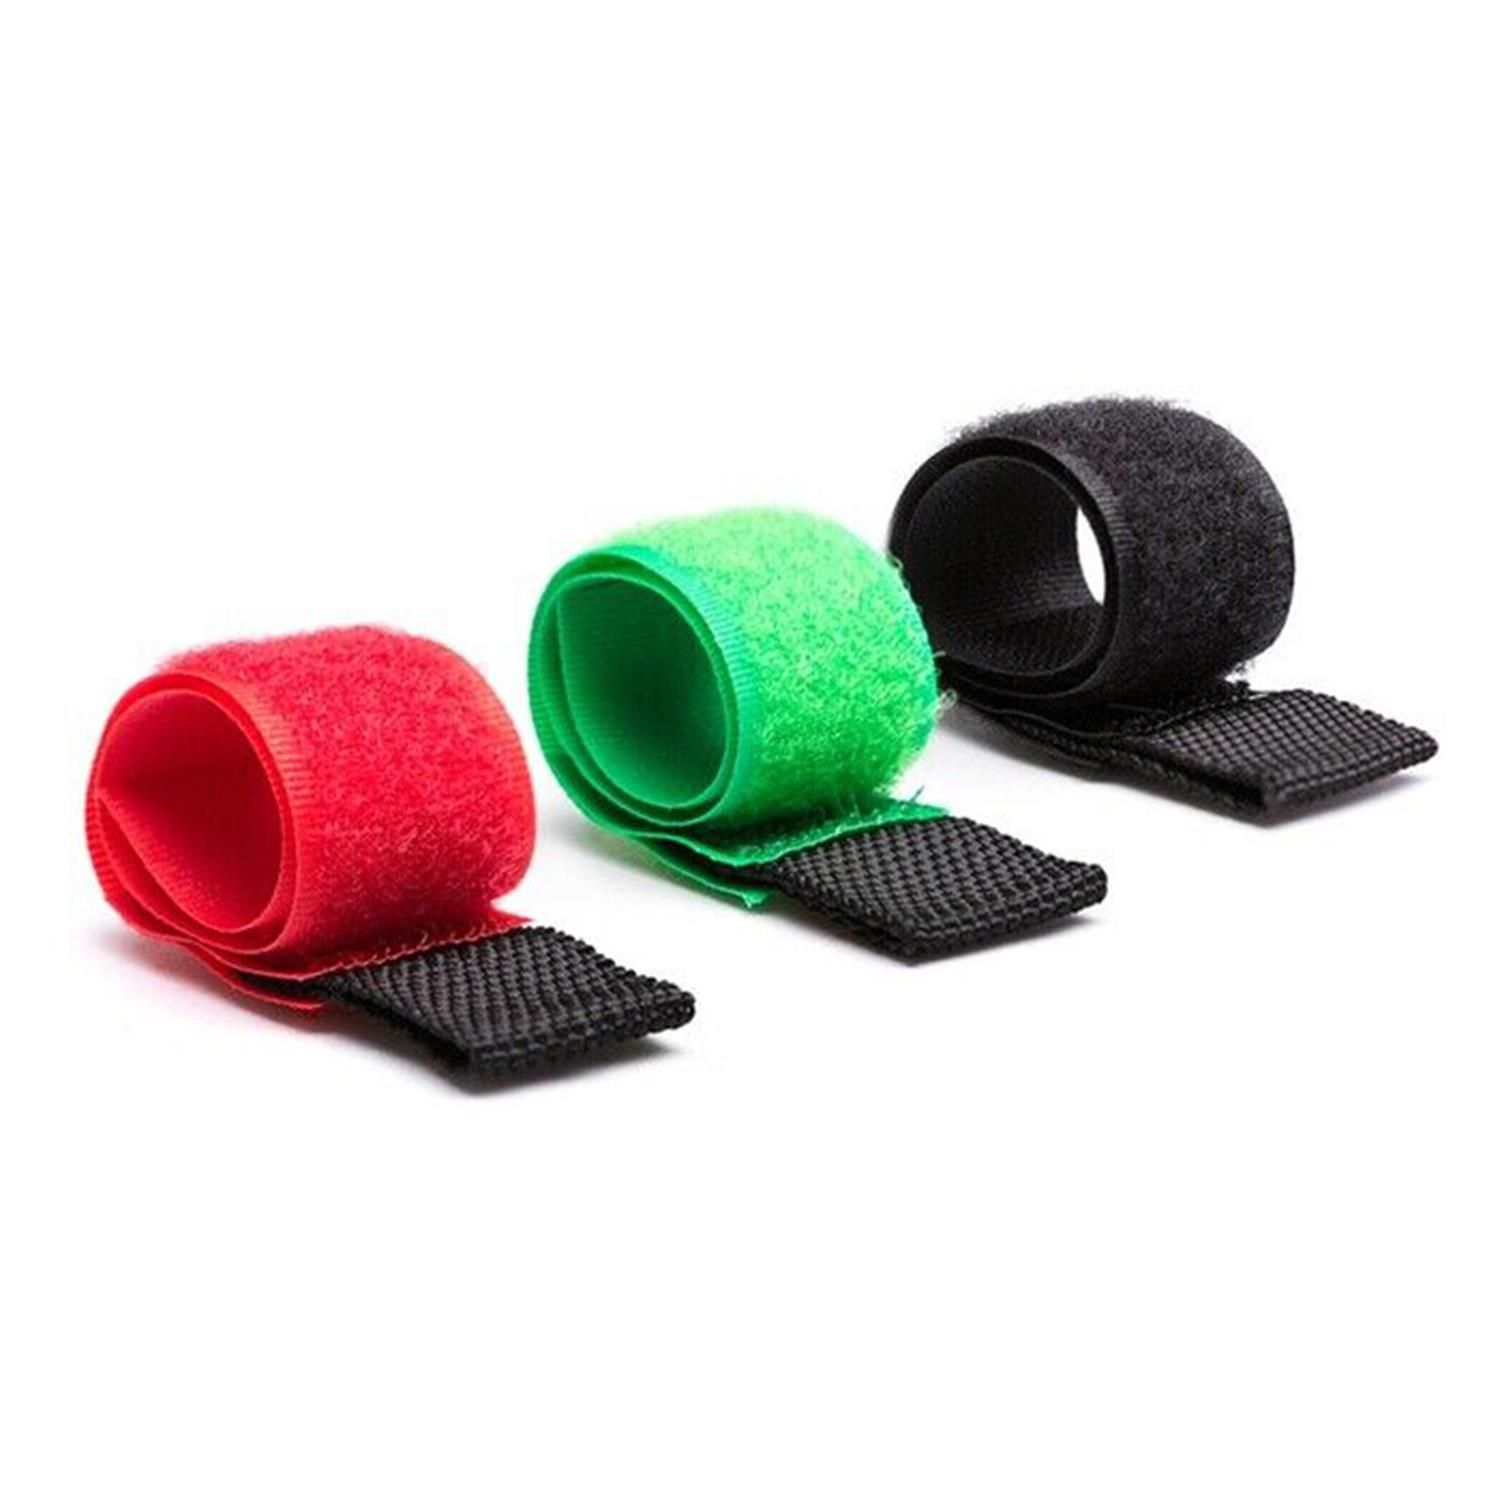 These straps feature various lengths and colors to get cable chaos under control.

Product Description :
Good for securing sports equipment while traveling, or wiring cages in your vegetable garden
Hook and loop securing straps are multipurpose and adjustable

Pack Includes :
2,5m x 10cm straps: seven black, four red, and four dark green
2,5cm x 15cm straps: three black, one red, and one dark green
2,5cm x 20cm straps: three black, one red, and one dark green